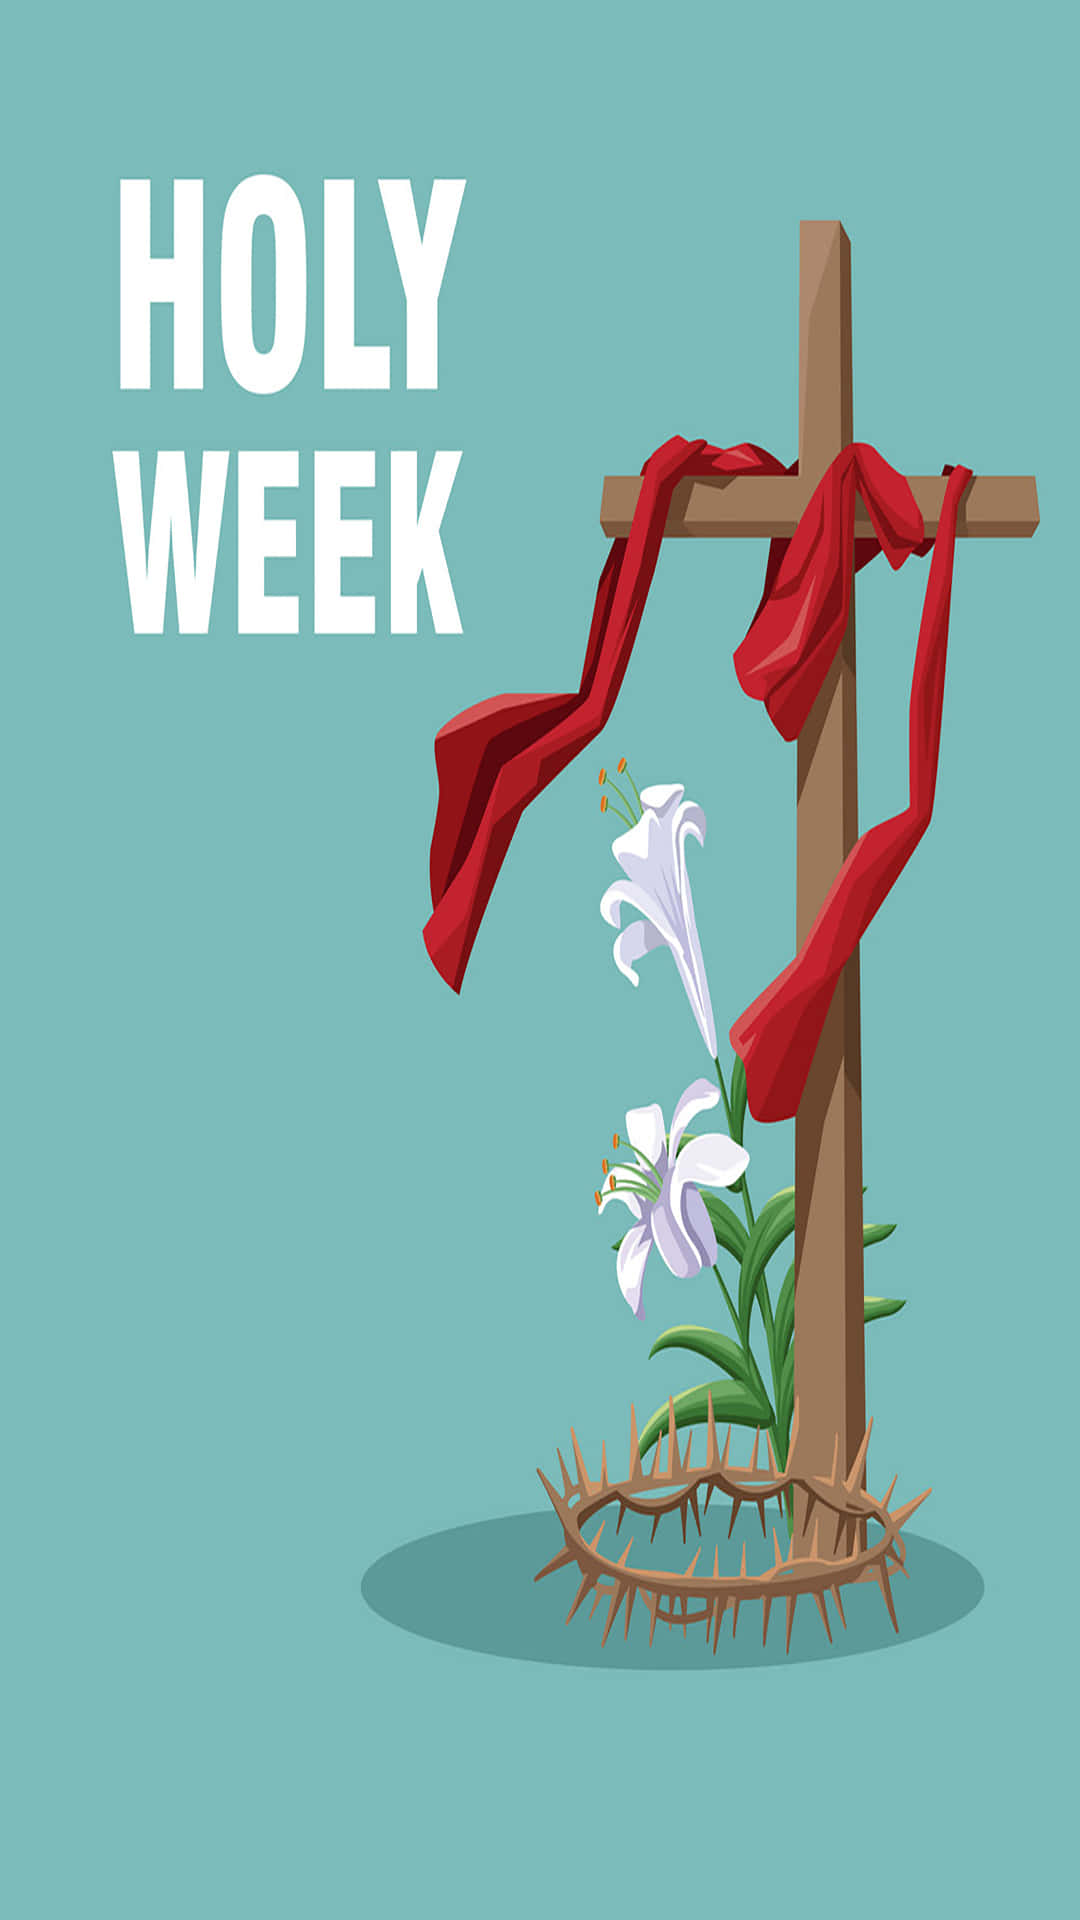 Celebrate Holy Week with faith, joy and love Wallpaper